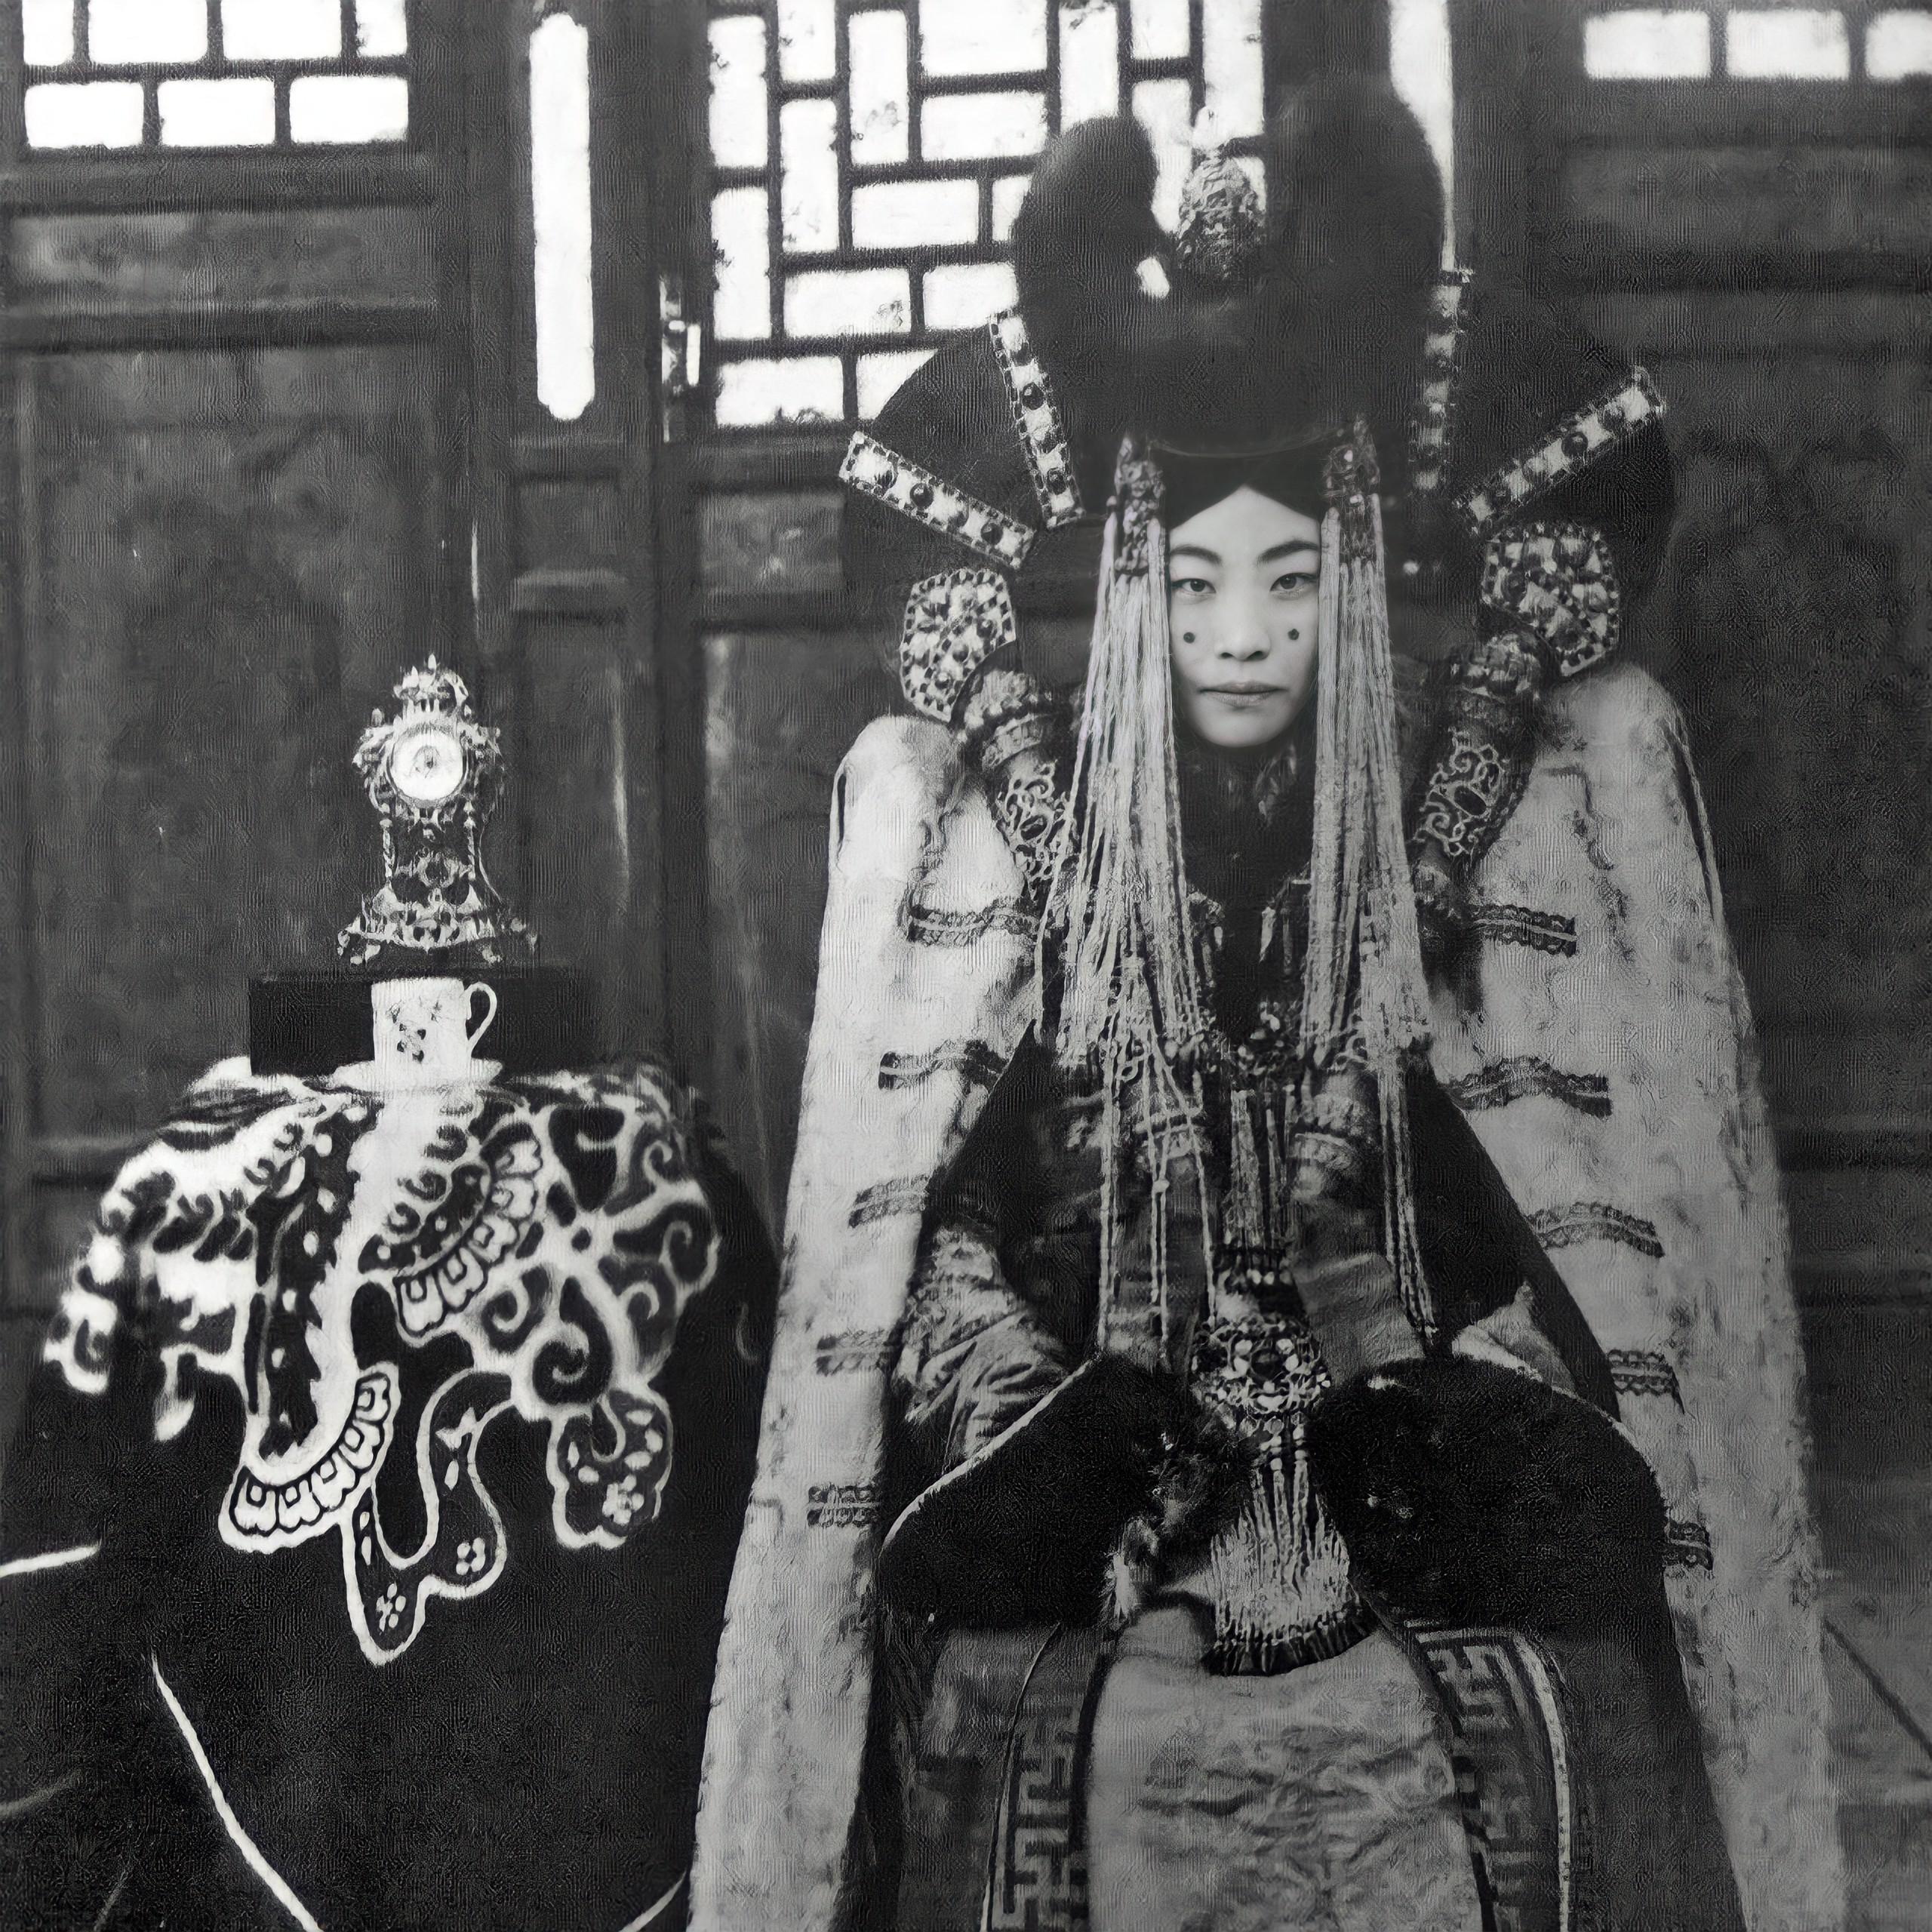 Queen Genepil was the last queen of Mongolia. She was executed in May, 1938 shot by Russian troops as part of the Stalinist repressions in Mongolia. The Star Wars character, Queen Amidala, took inspiration from her